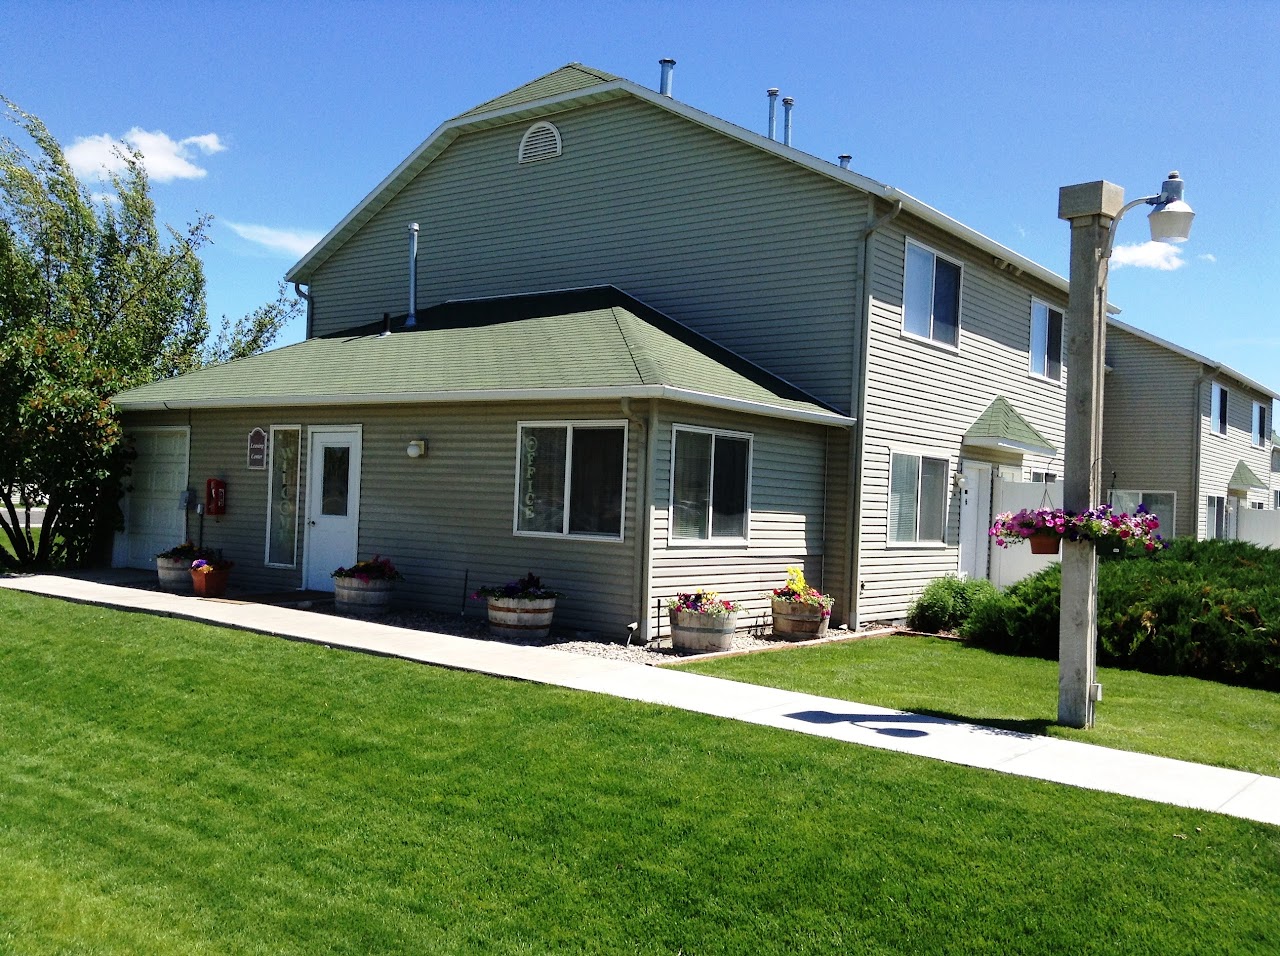 Photo of WEST TISBURY. Affordable housing located at 455 WEST 5TH STREET SOUTH REXBURG, ID 83440